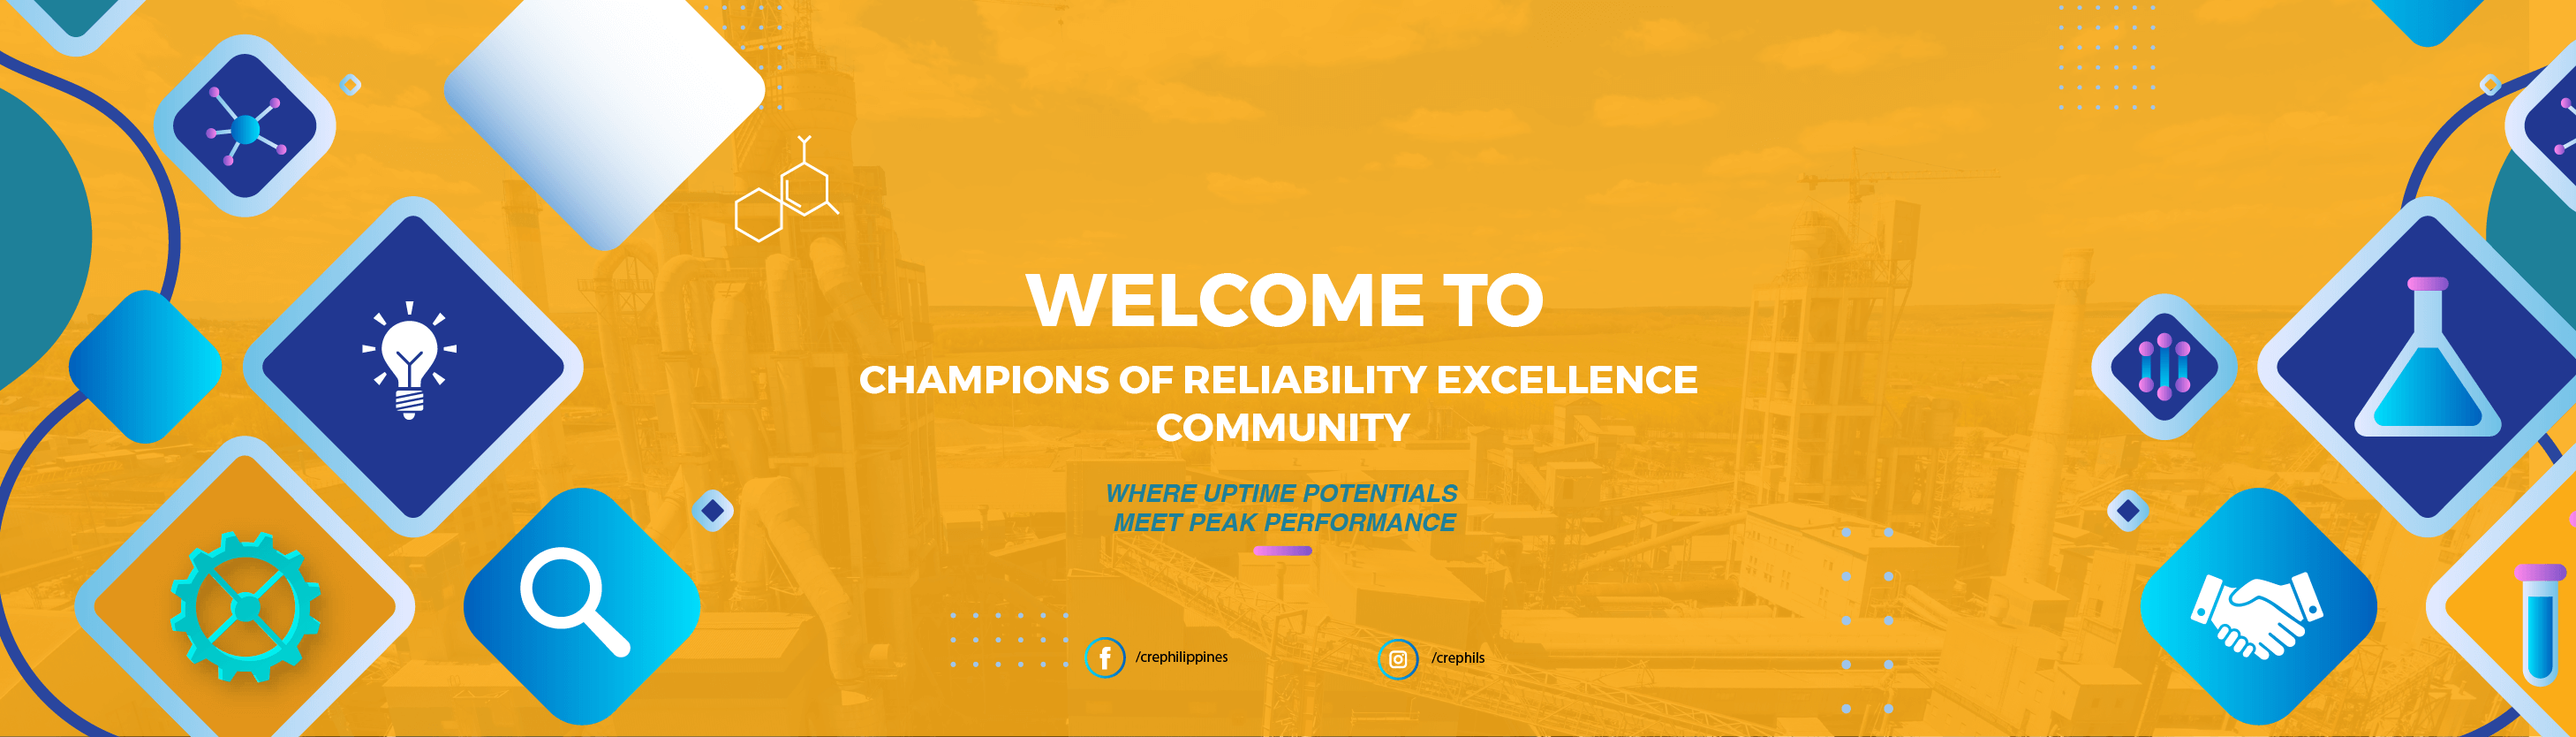 champions-of-reliability-excellence-wb-01